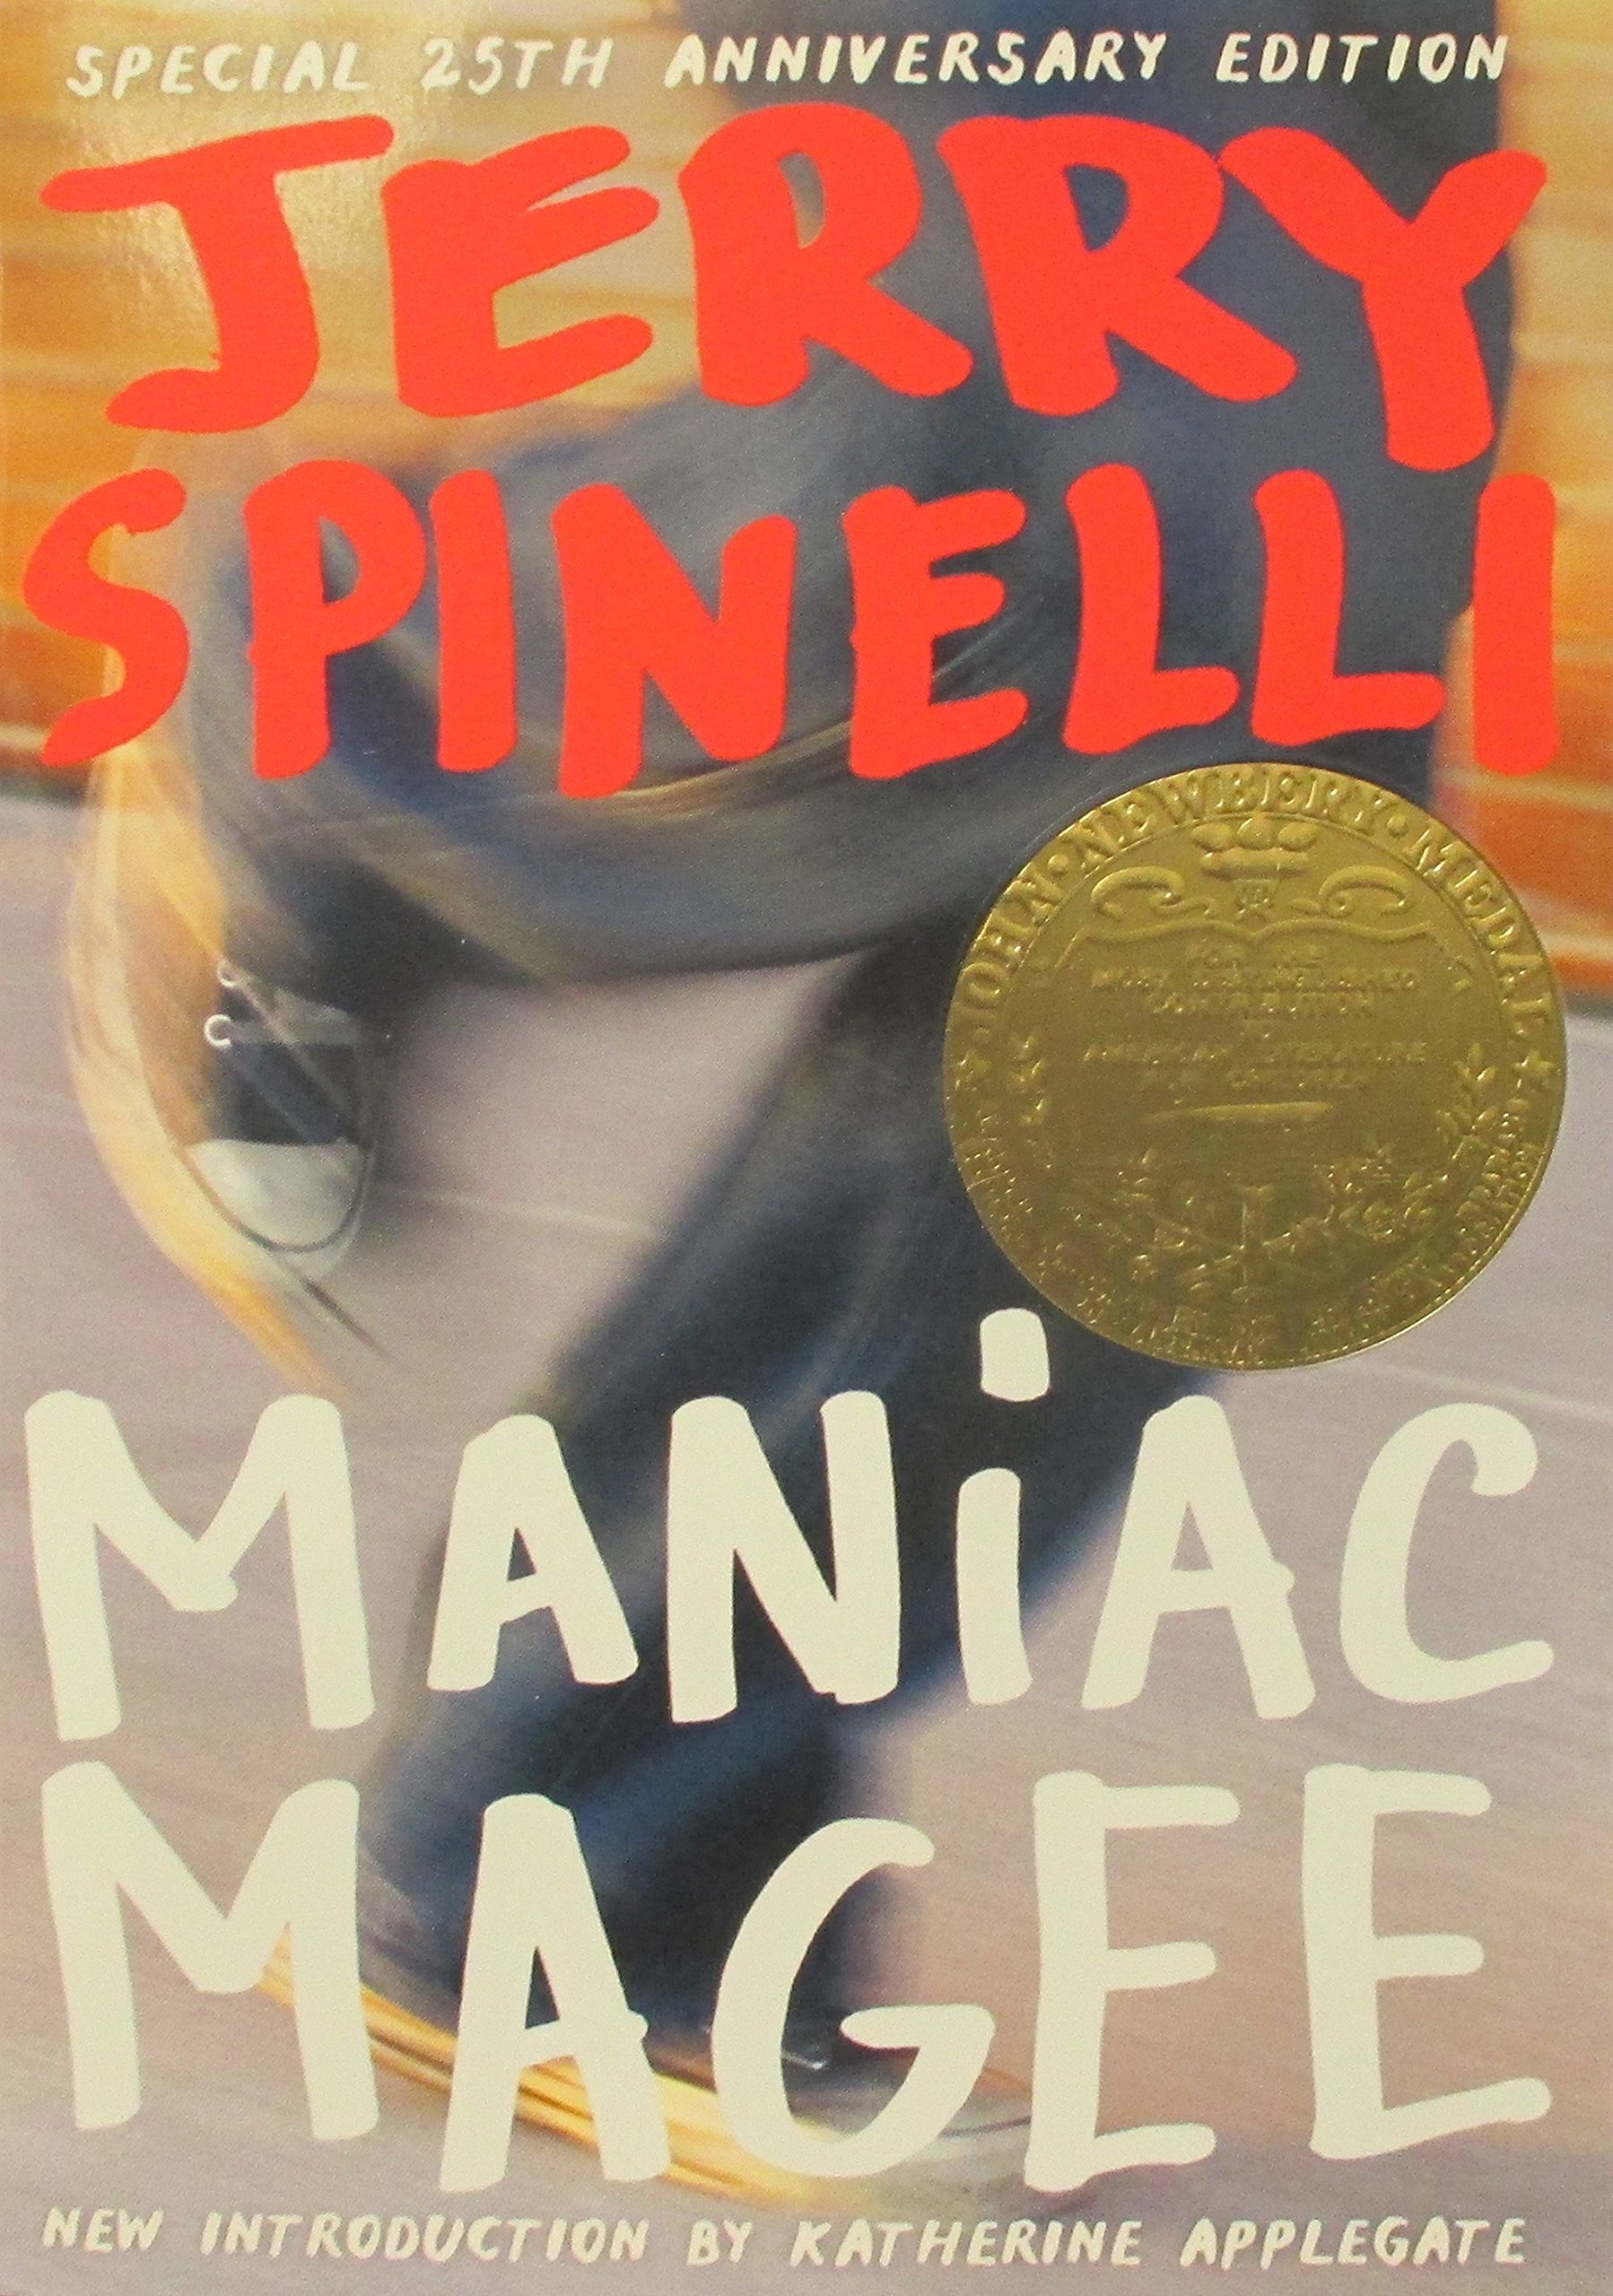 Maniac Magee – Jerry Spinelli